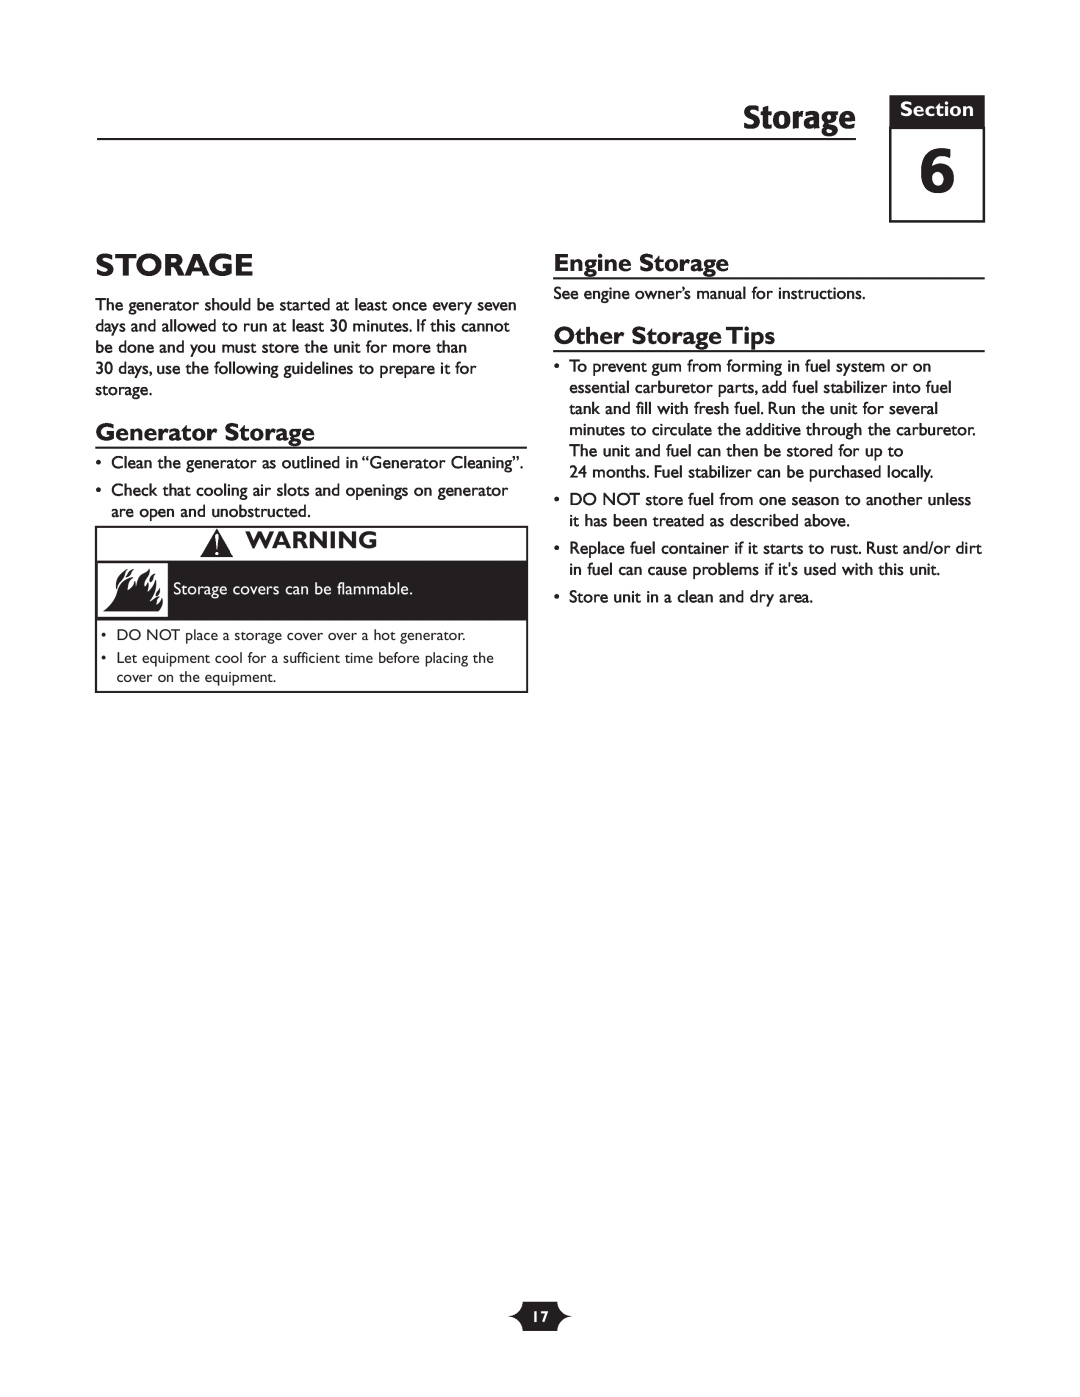 Briggs & Stratton 30237 Generator Storage, Engine Storage, Other Storage Tips, Storage covers can be flammable 